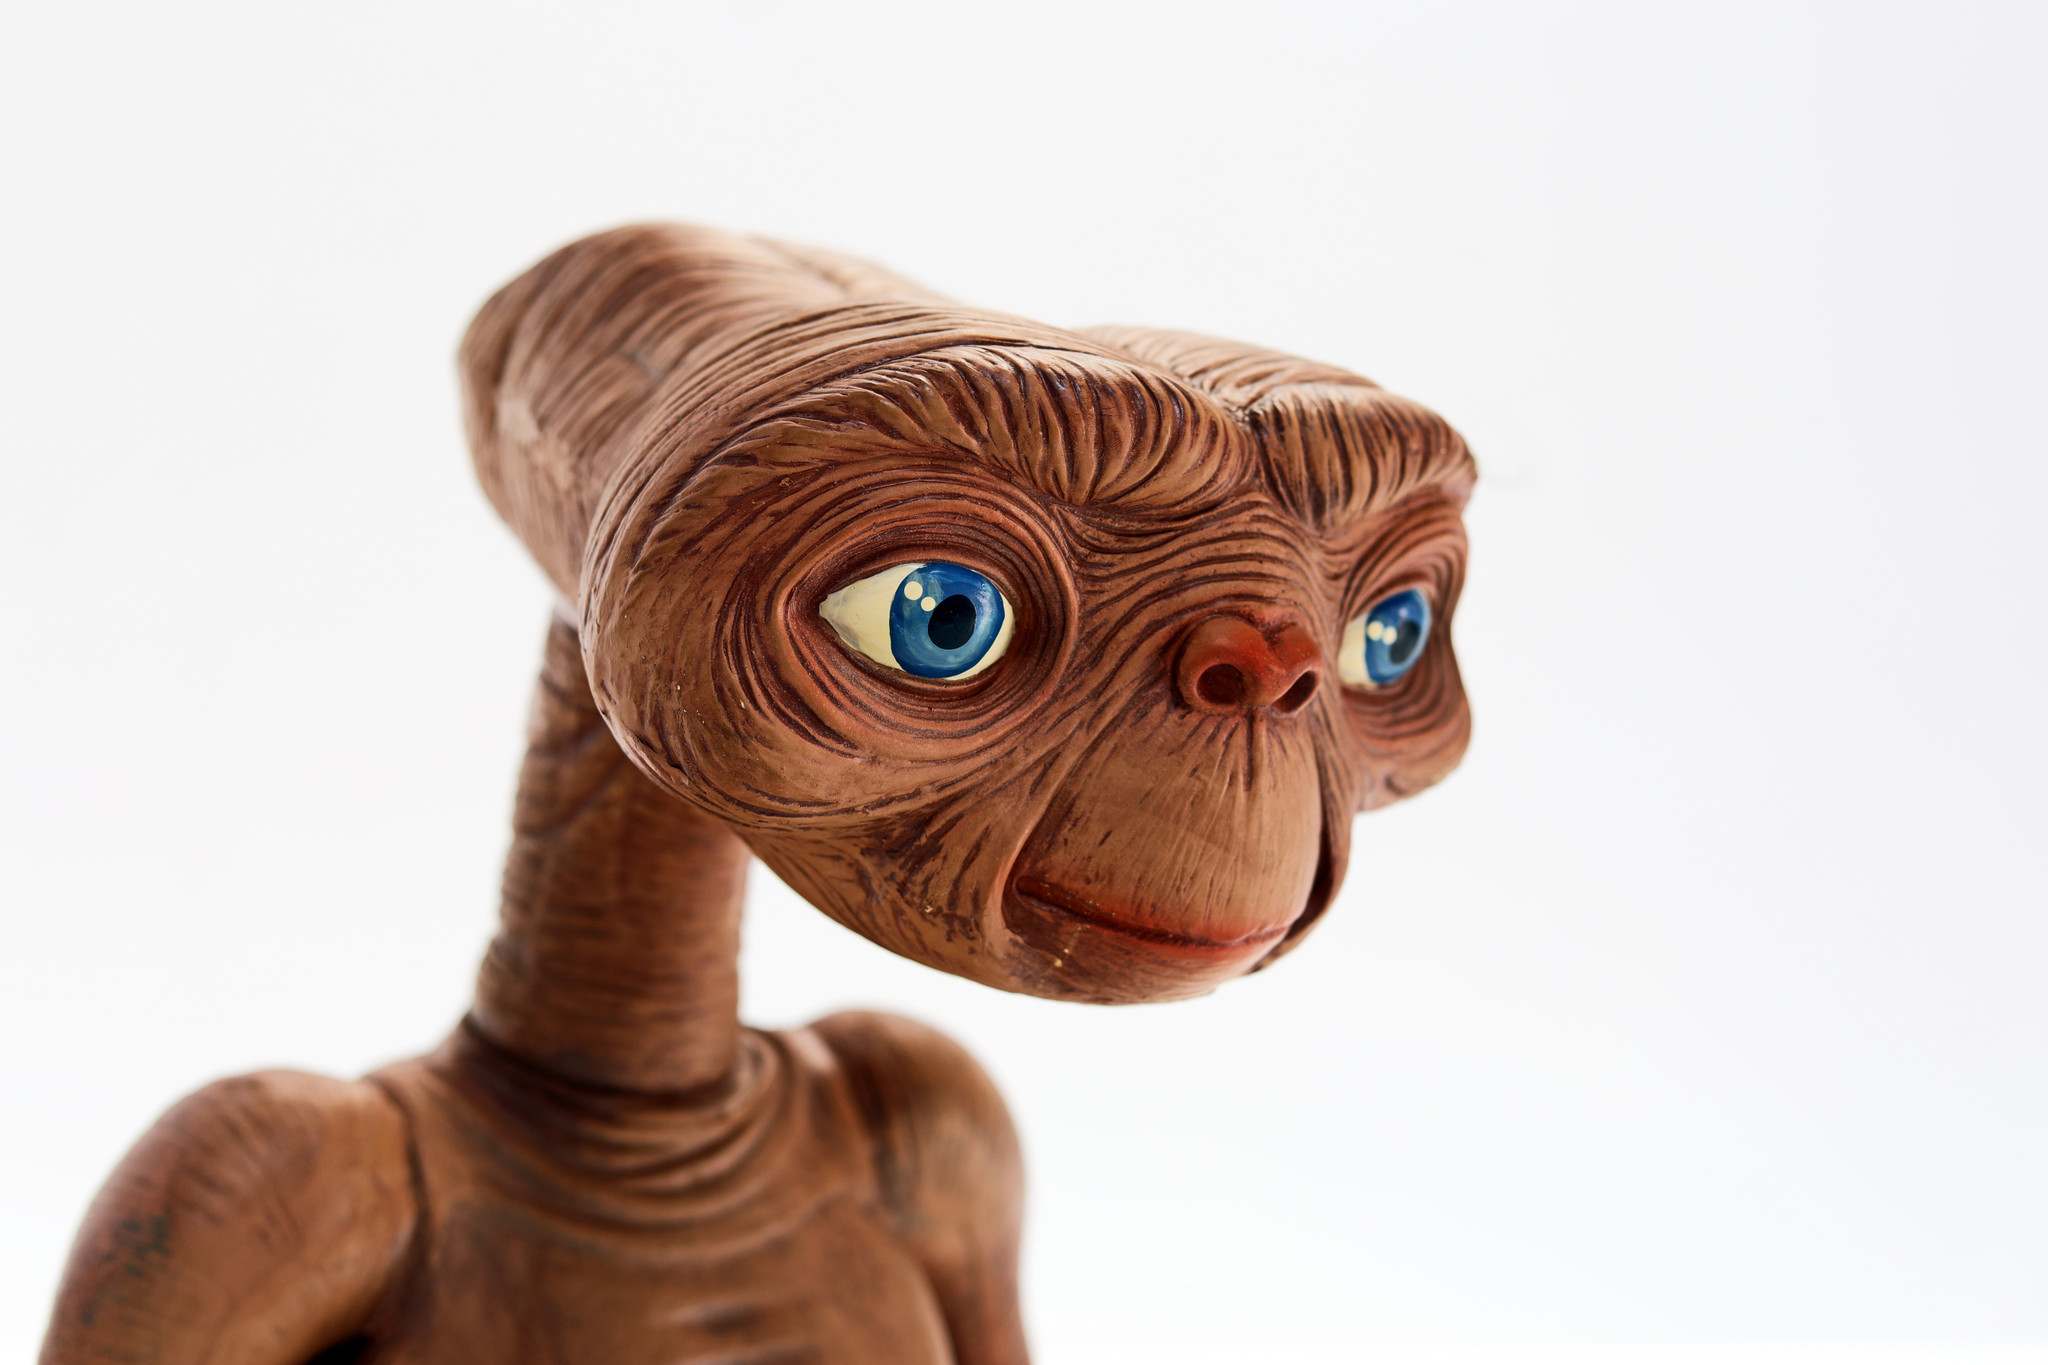 ORIGINAL LIFE SIZE ET PRODUCED BY UNIVERSAL STUDIO FOR NECA